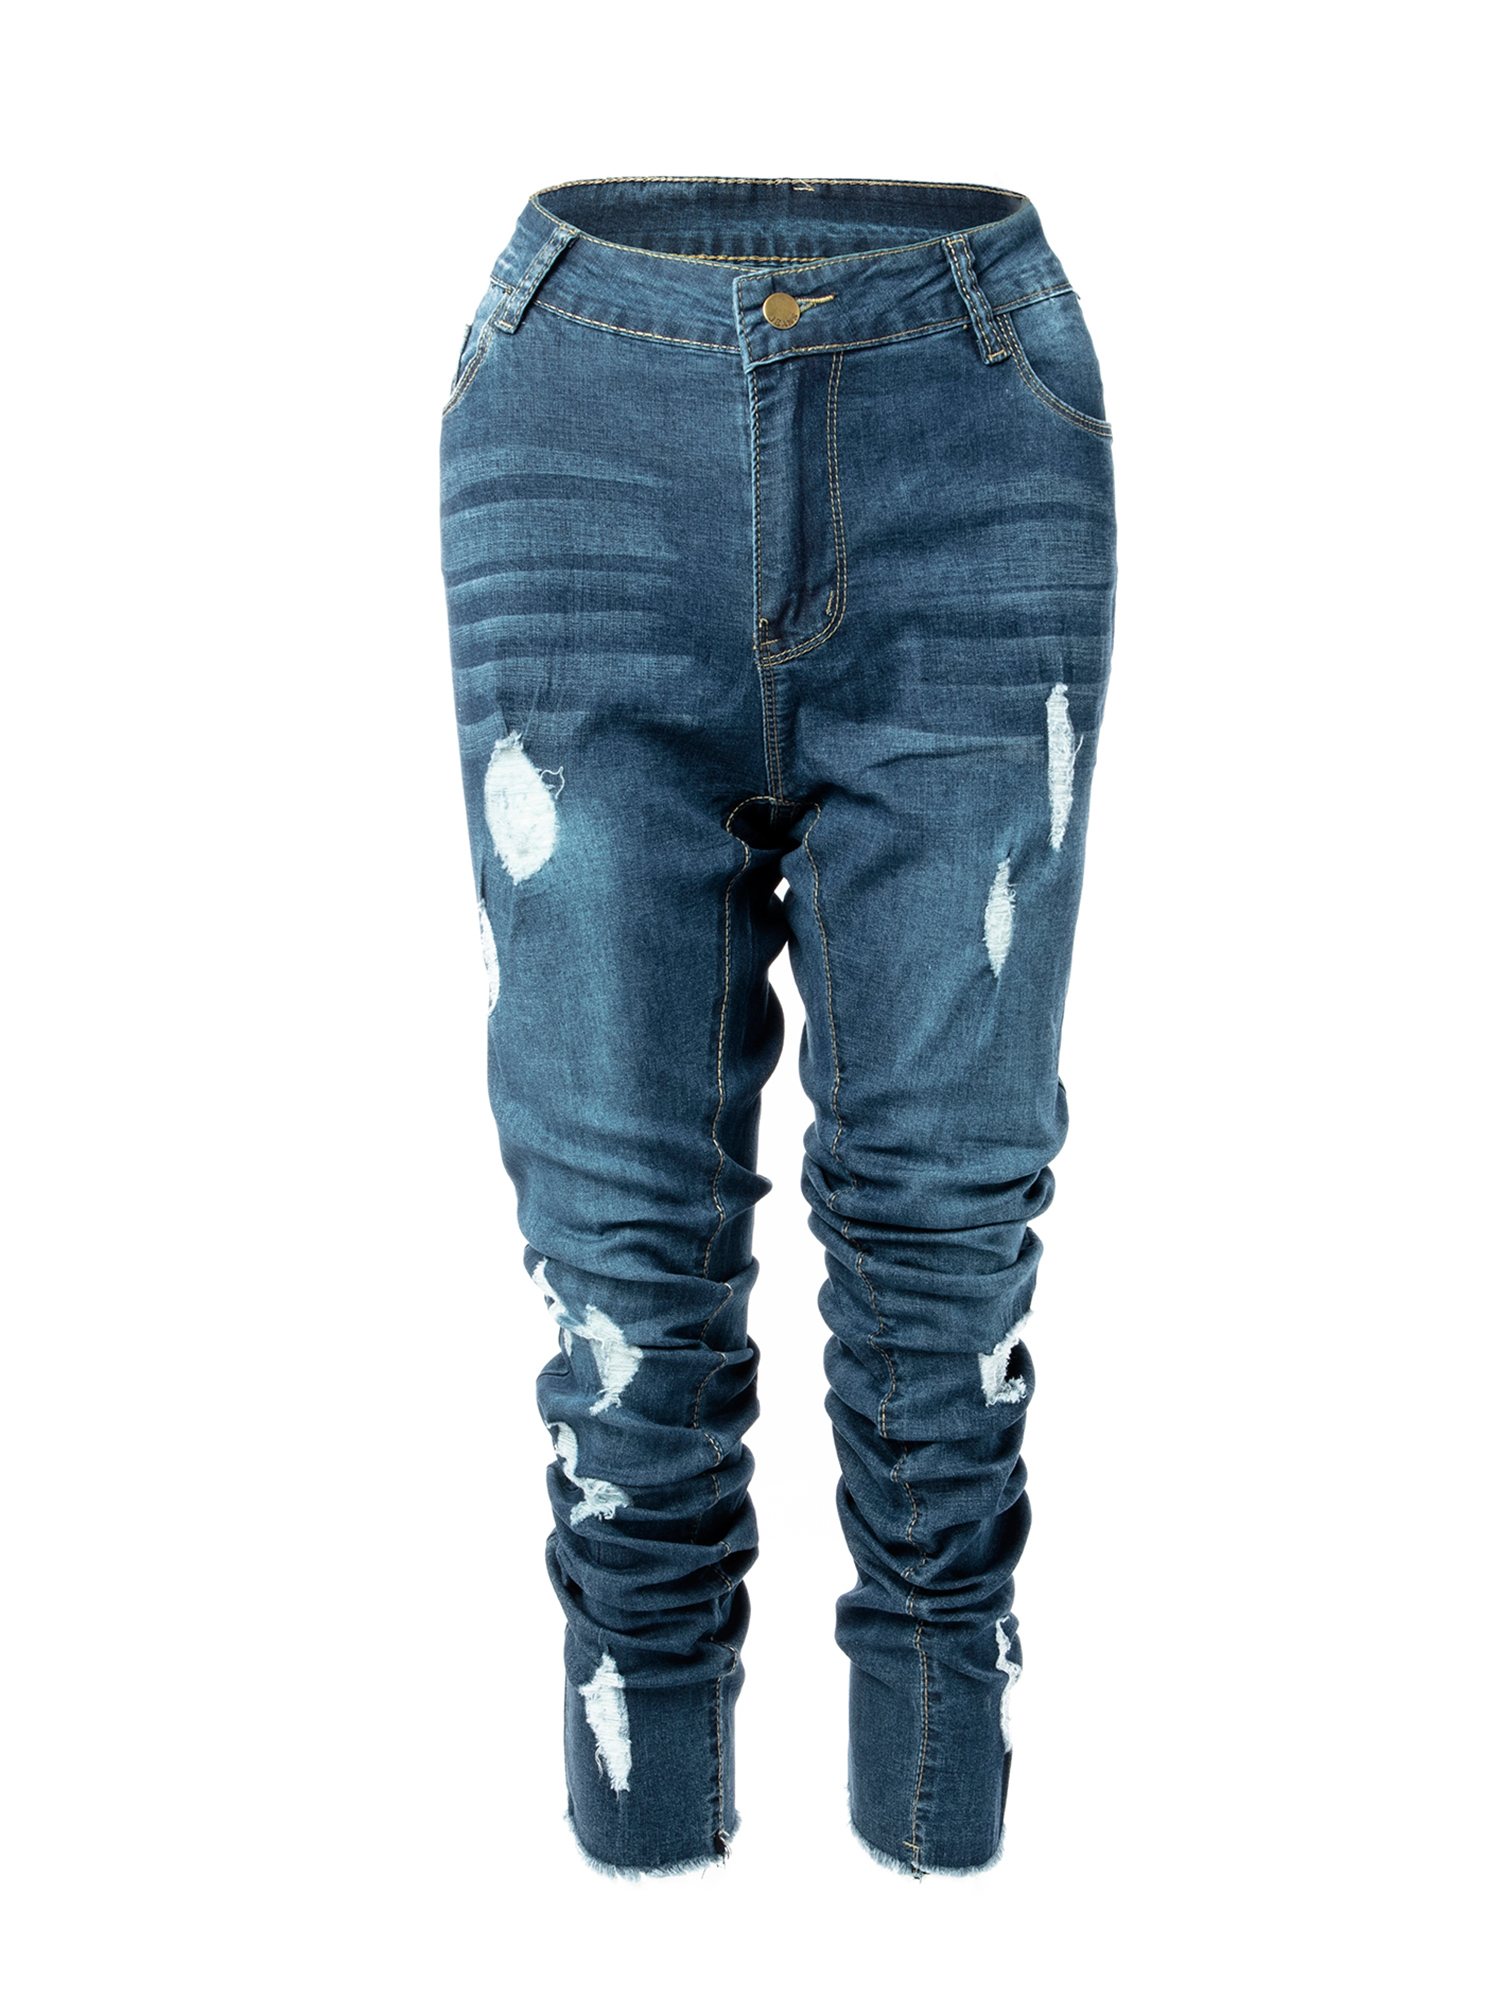 Women's Ripped Distressed Stretch Jeans High Waist Slim Fit Skinny Denim Comfy Pants Denim Jeans Trouser Blue - image 1 of 8